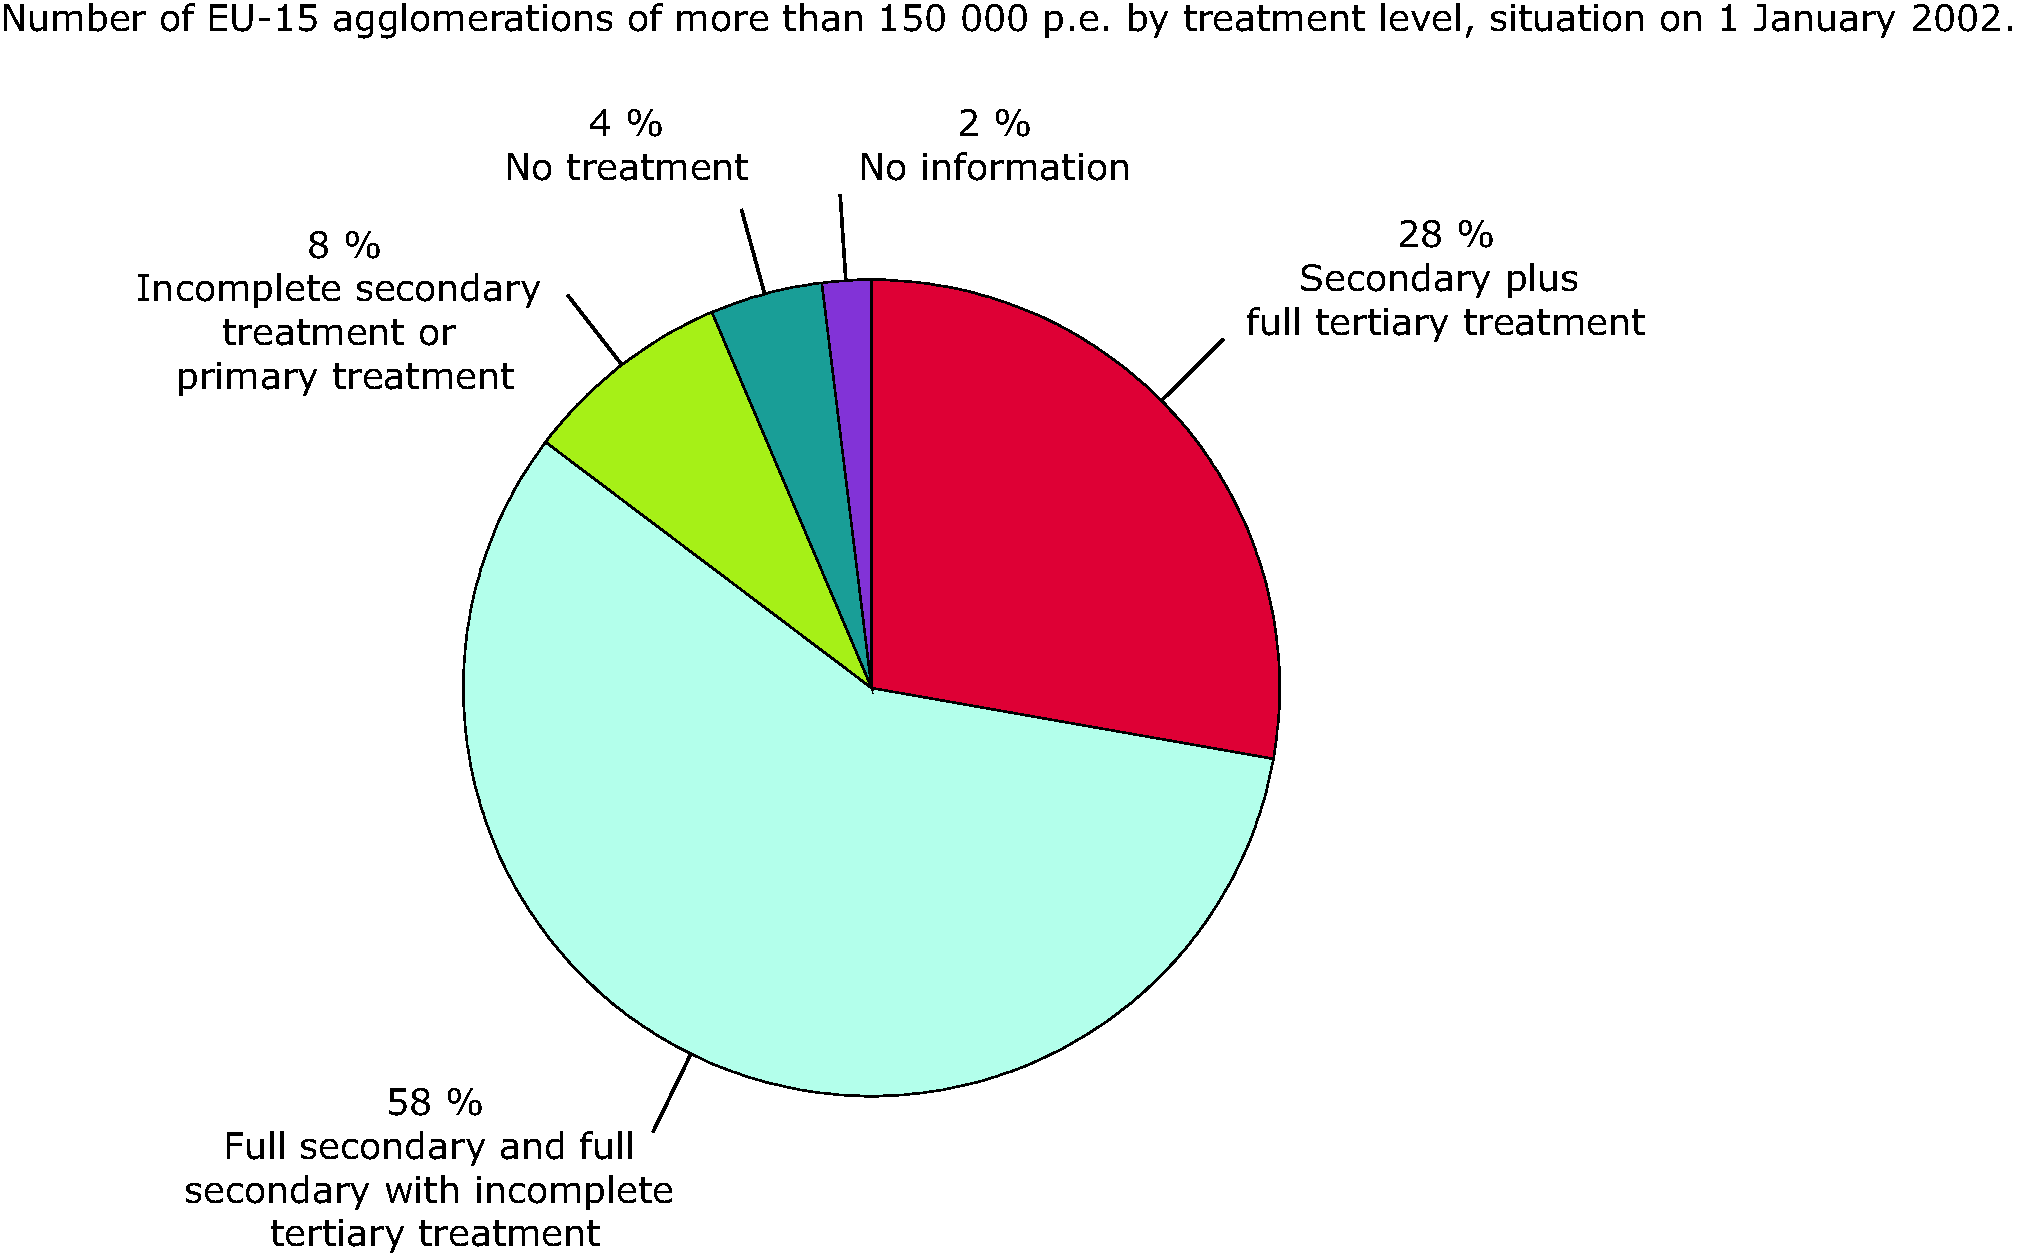 Number of EU-15 agglomerations of more than 150 000 p.e. by treatment level, situation on 1st January 2002